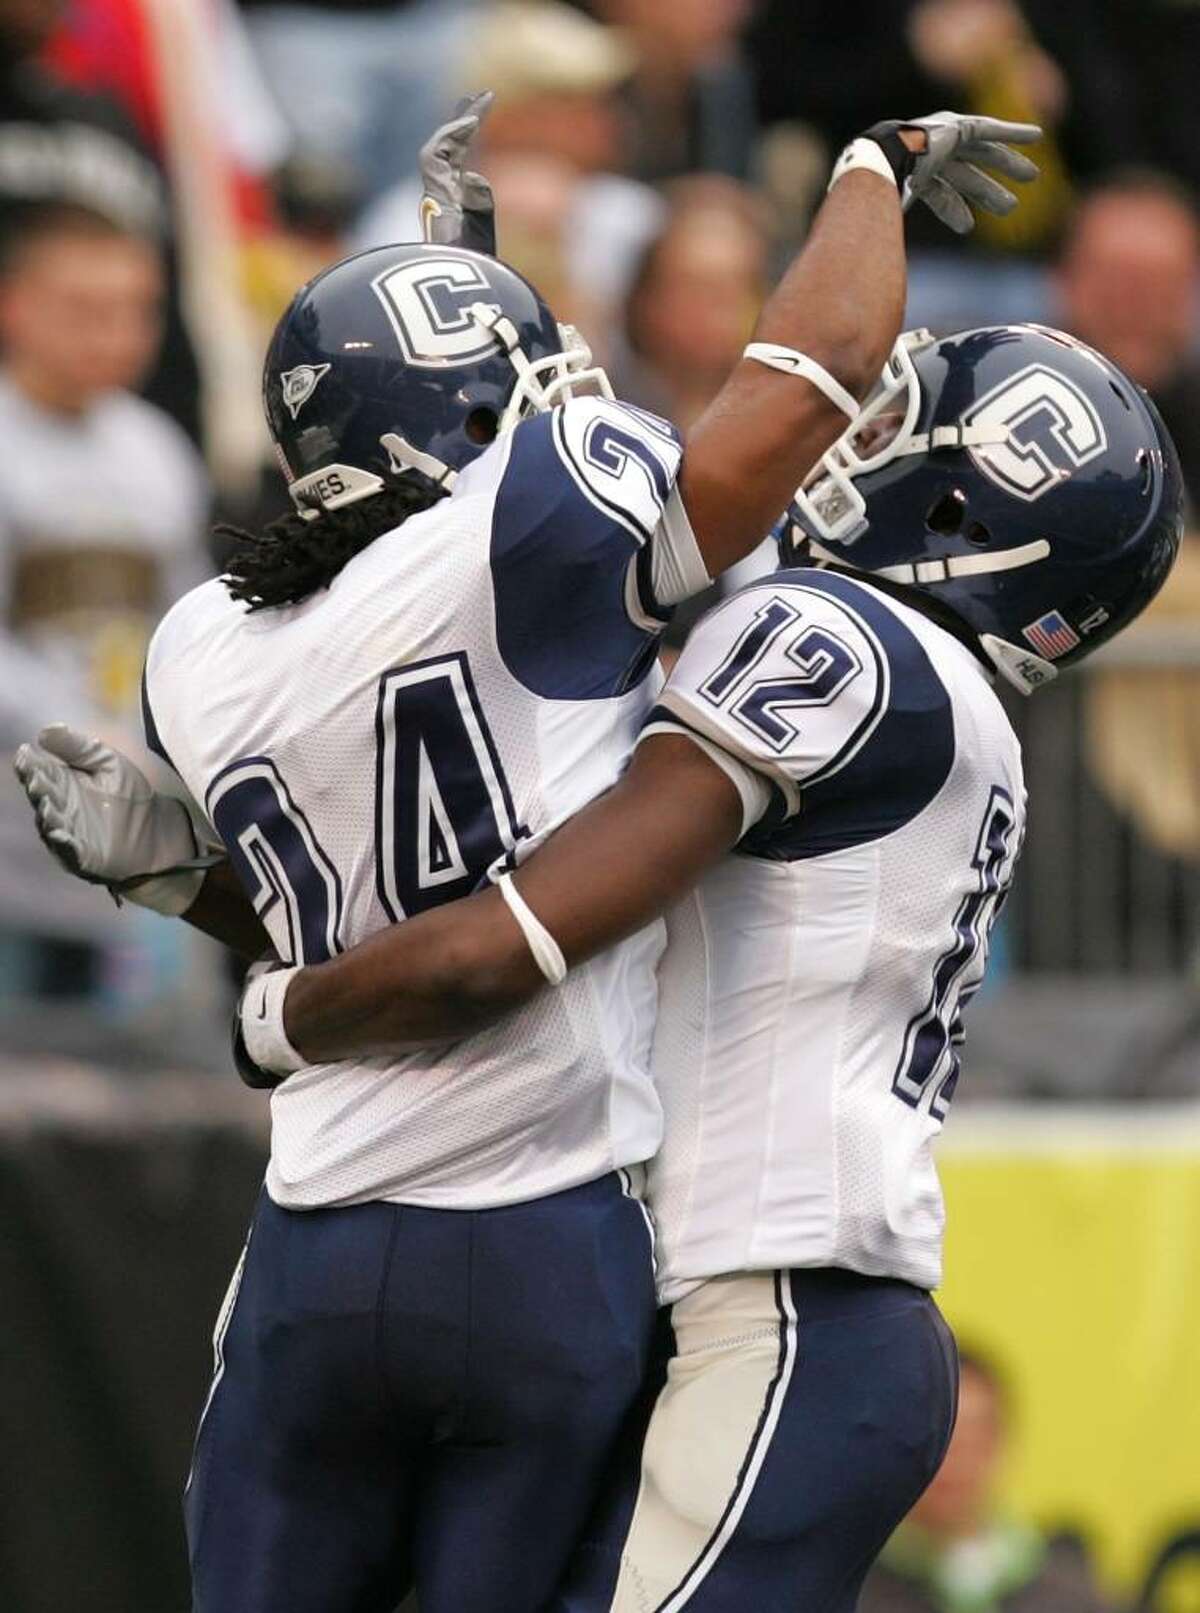 CHARLOTTE, NC - DECEMBER 29: Teammates Larry Taylor #24 and Marcus Easley #12 of the Connecticut Huskies celebrate after Taylors touchdown against the Wake Forest Demon Deacons at Bank of America Stadium on December 29, 2007 in Charlotte, North Carolina. (Photo by Streeter Lecka/Getty Images)